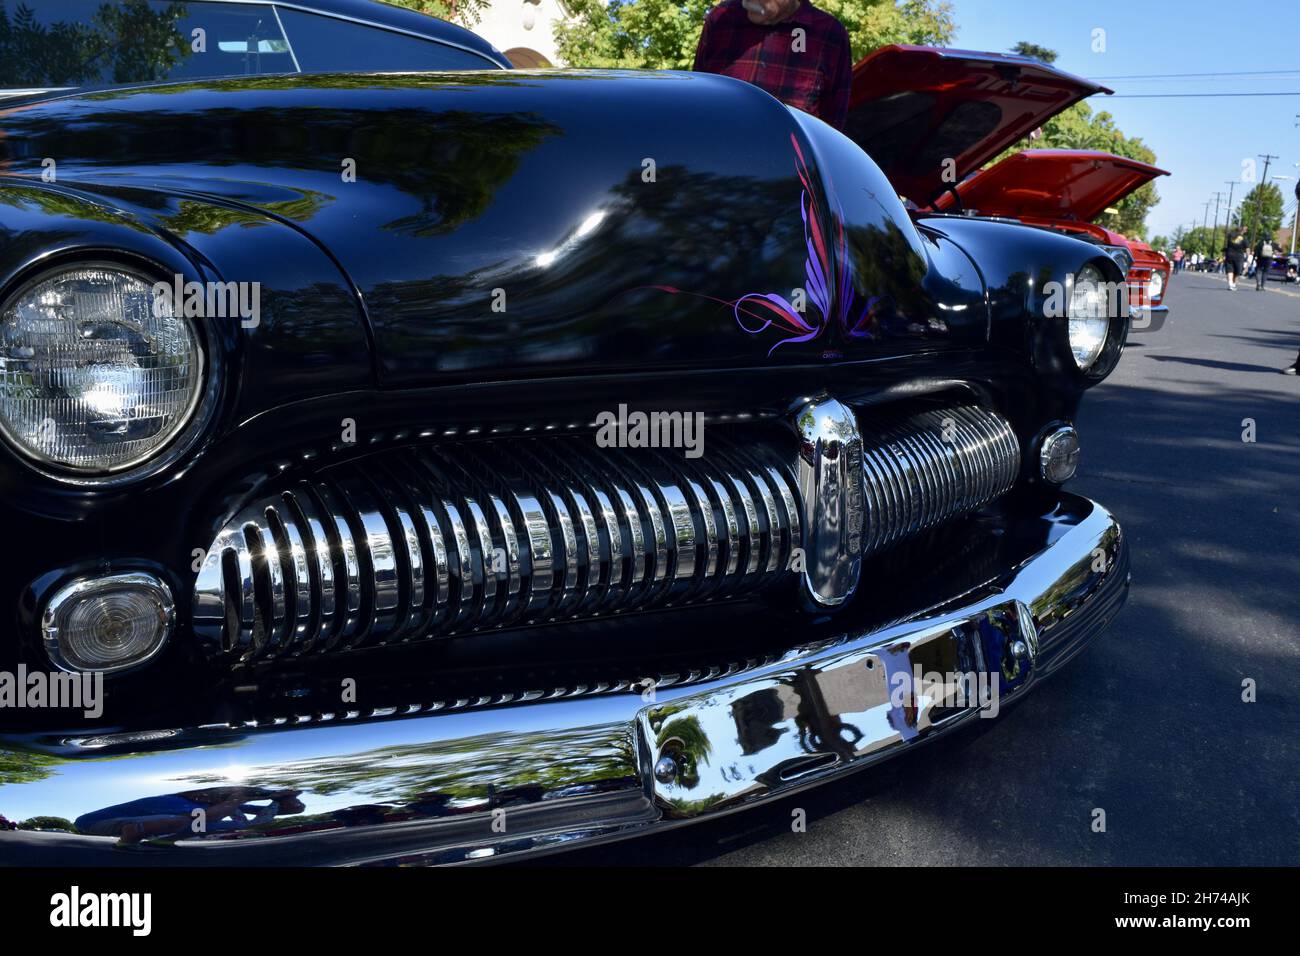 FRESNO, UNITED STATES - Oct 09, 2021: A closeup shot of a beautiful classic black 1949 Mercury Coupe car parked outside Stock Photo